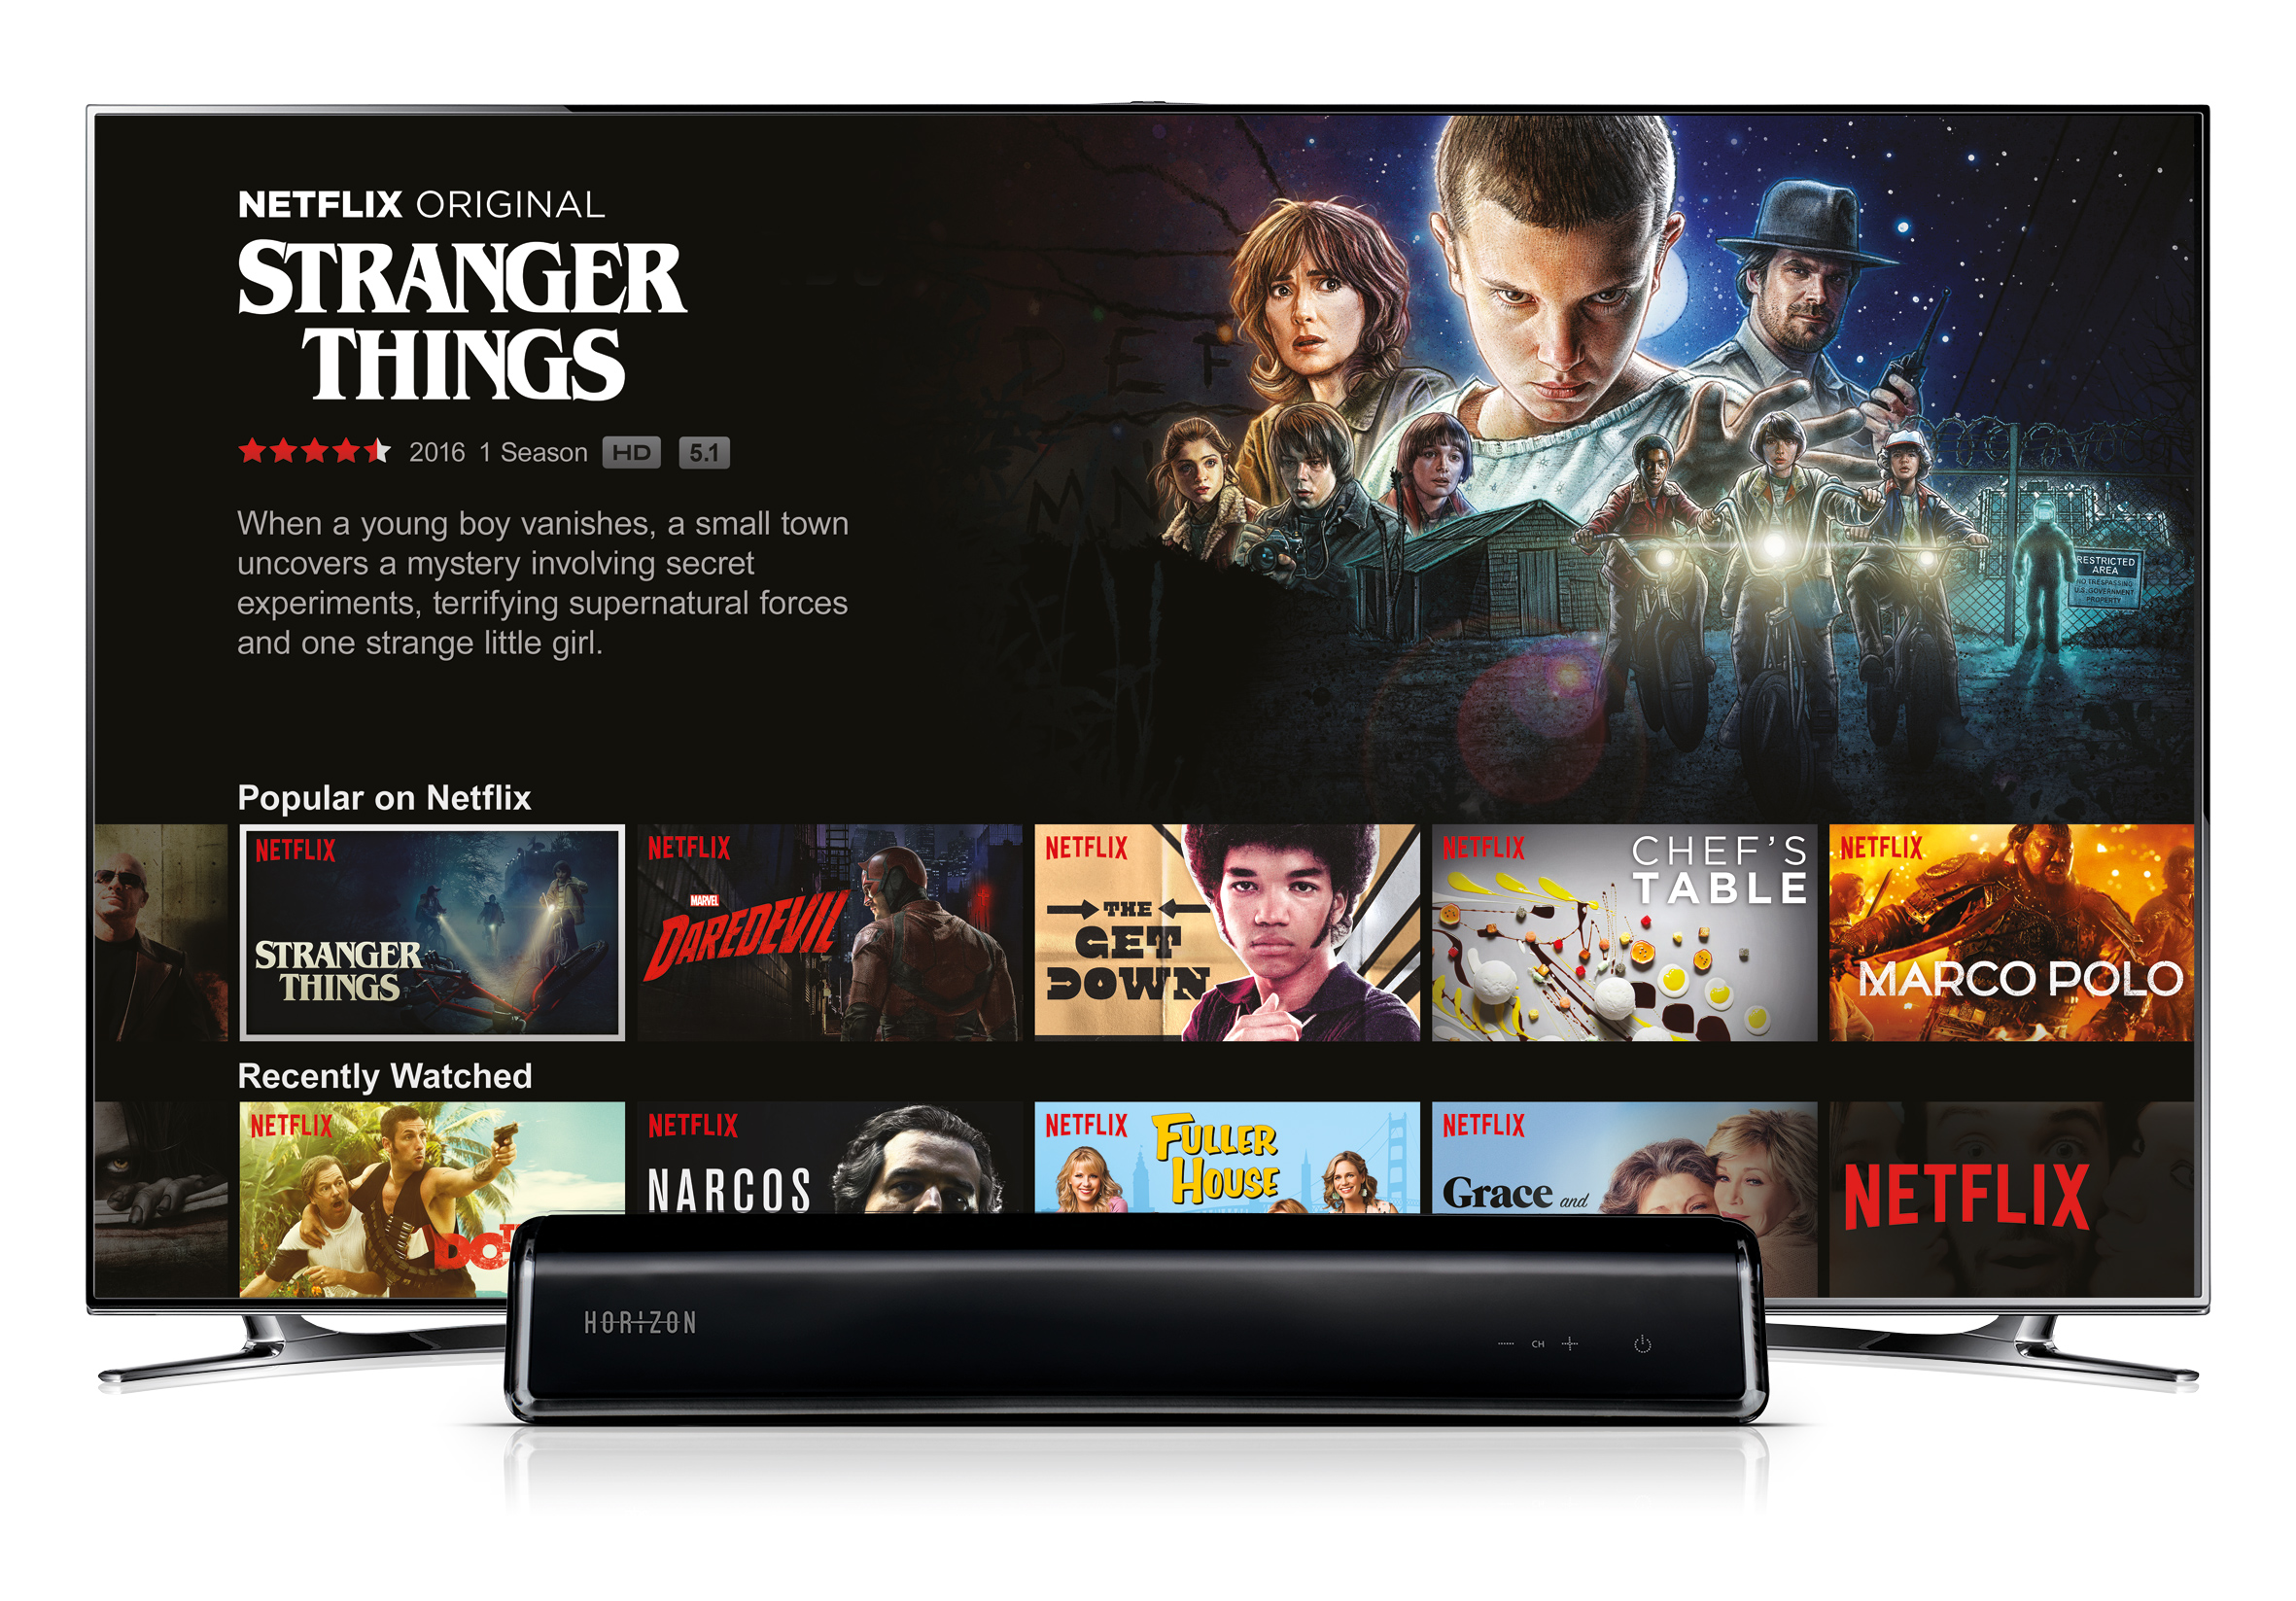 Enjoy Netflix's world of entertainment on your Horizonbox. All you need is a subscription.